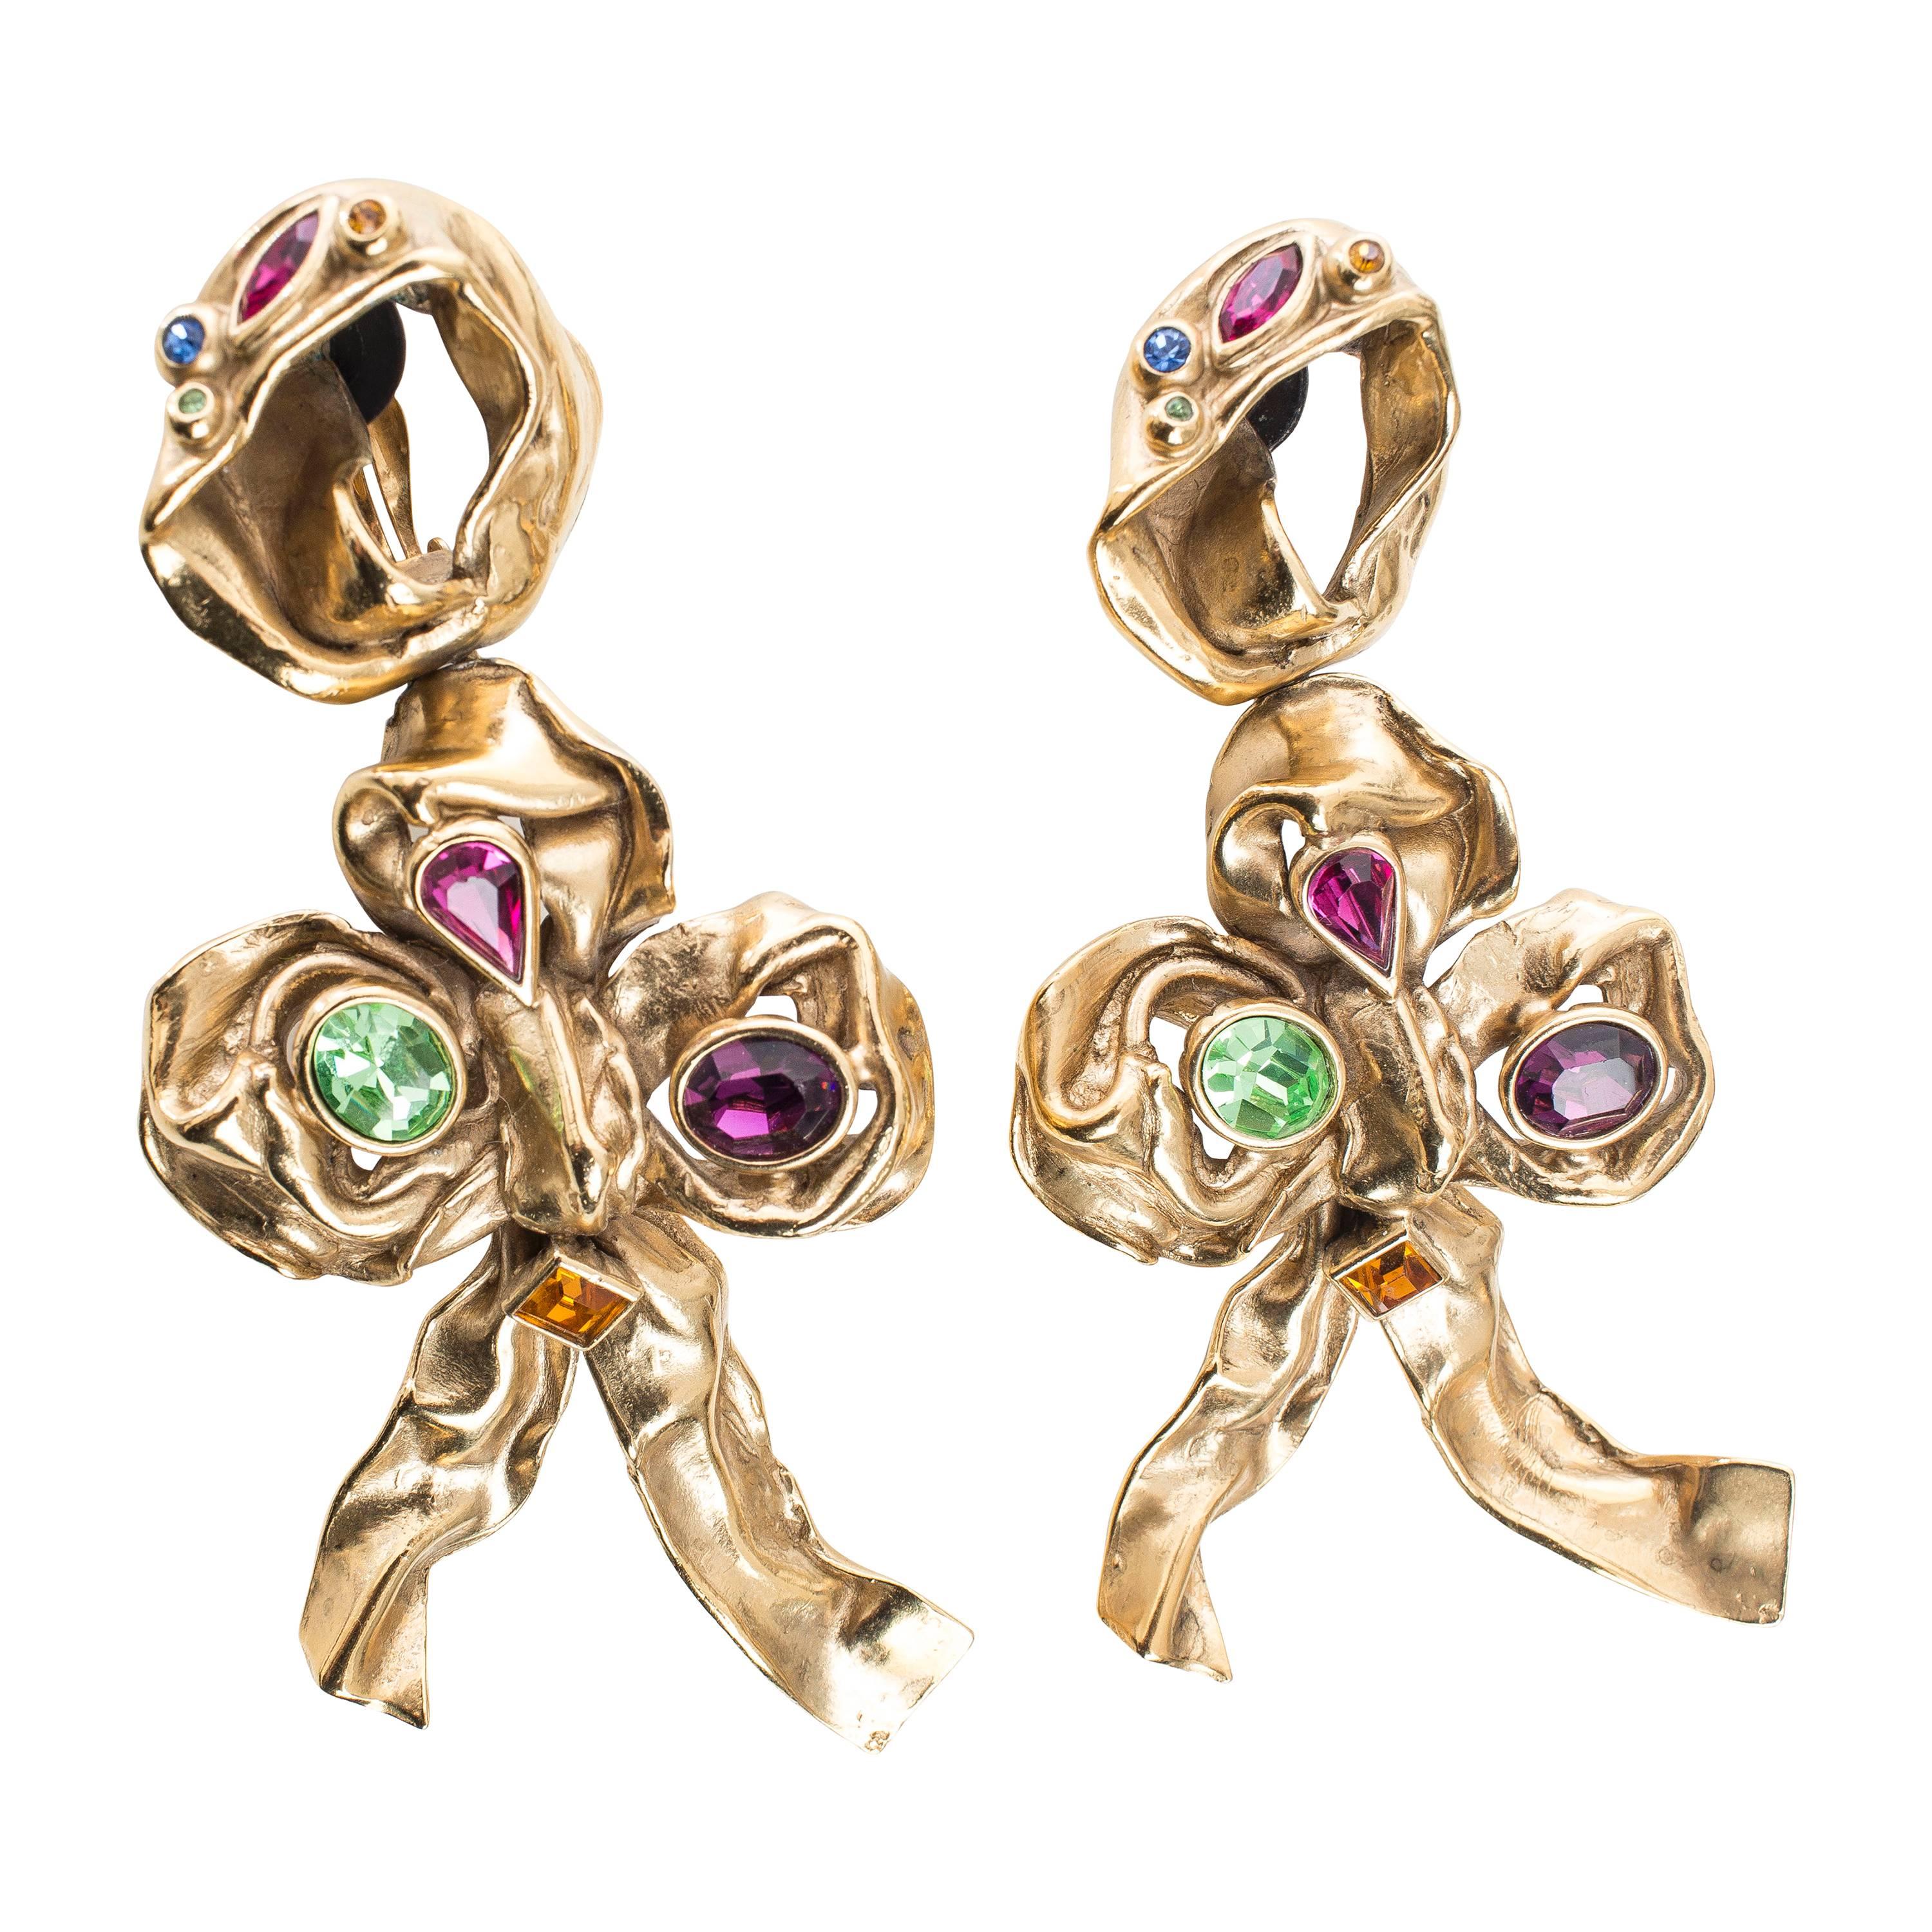 Yves Saint Laurent Massive Gilt Leaf Earrings With Faceted Stones, Circa 1980's im Angebot